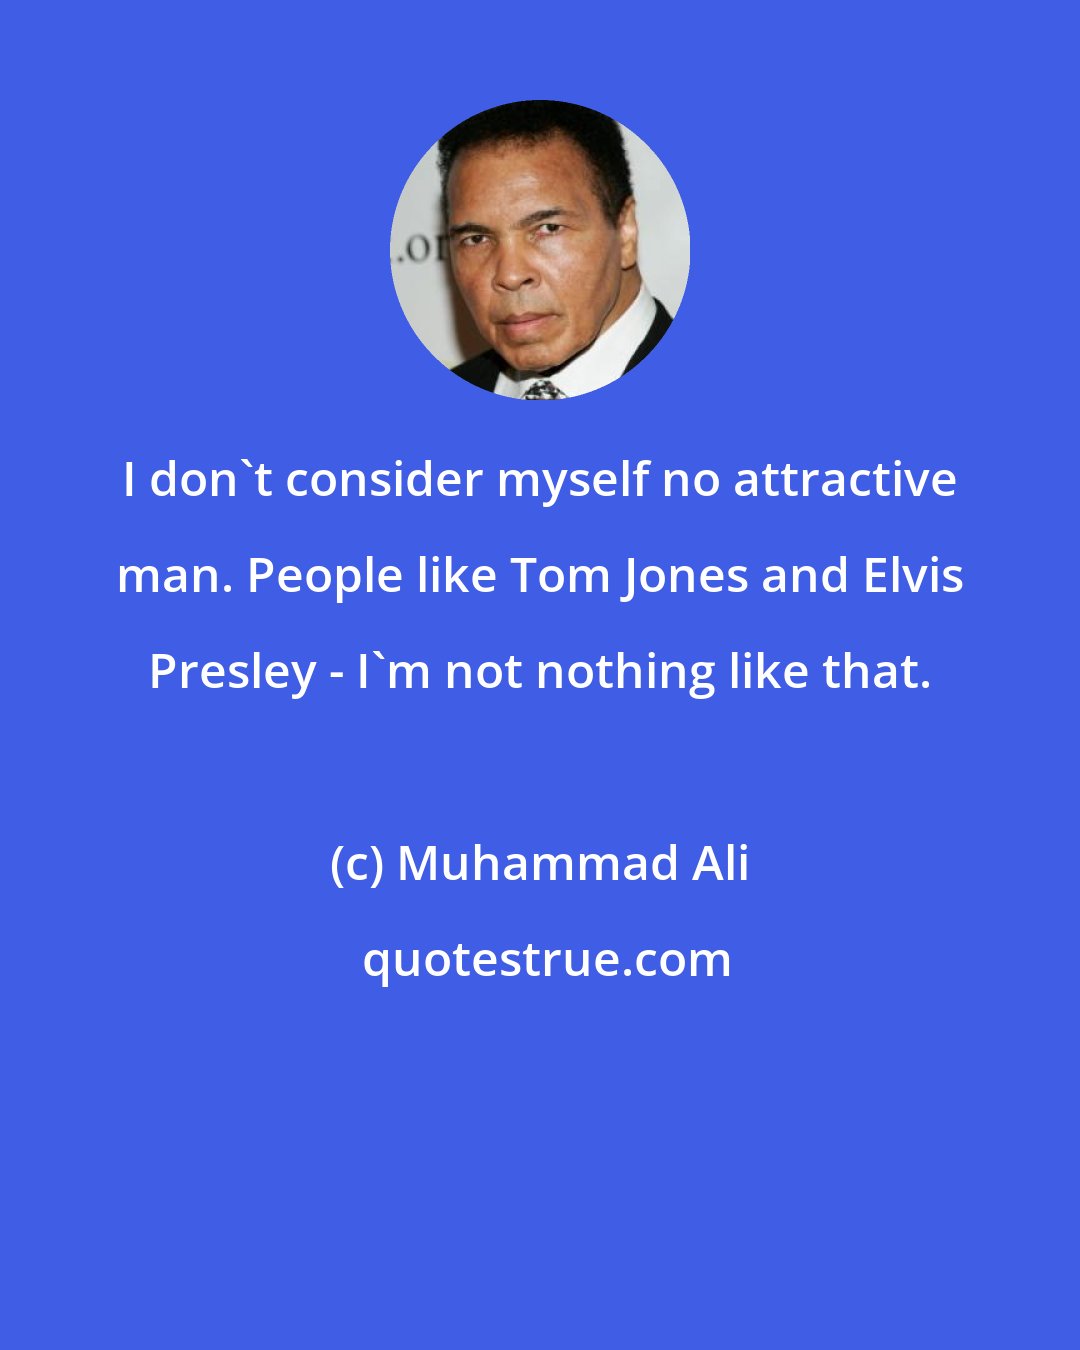 Muhammad Ali: I don't consider myself no attractive man. People like Tom Jones and Elvis Presley - I'm not nothing like that.